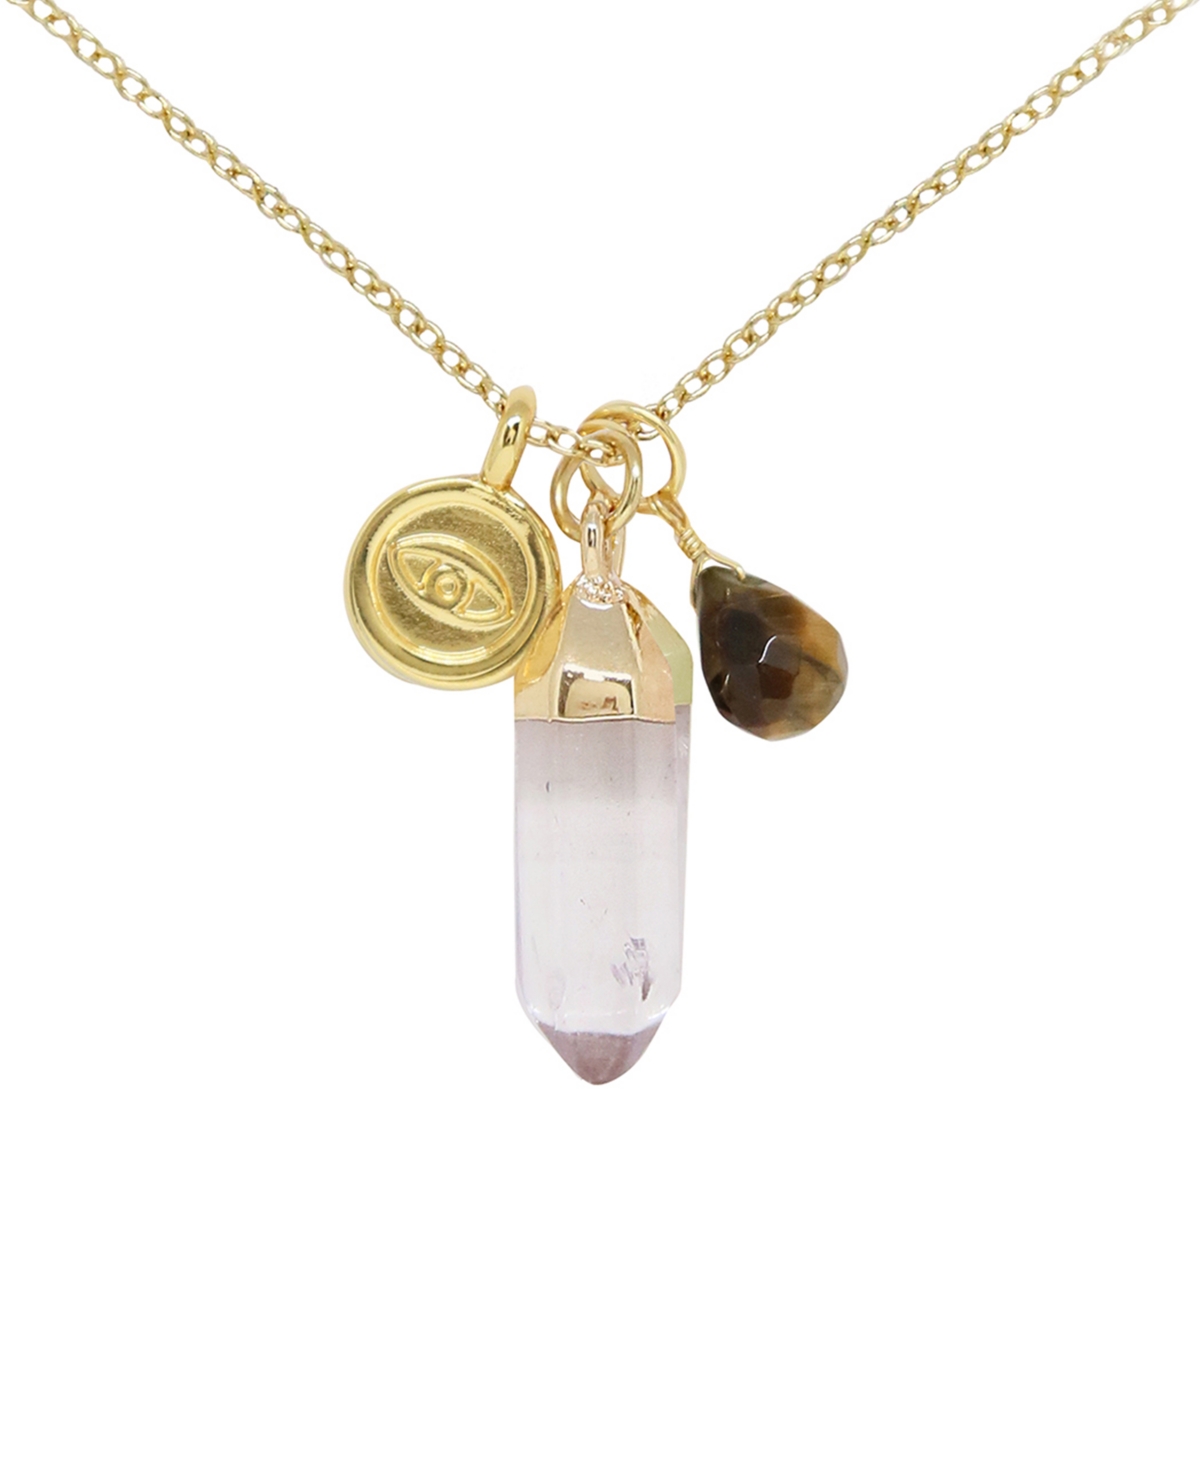 Charged Crystal Gemstone Charm Necklace In Tiger's Eye